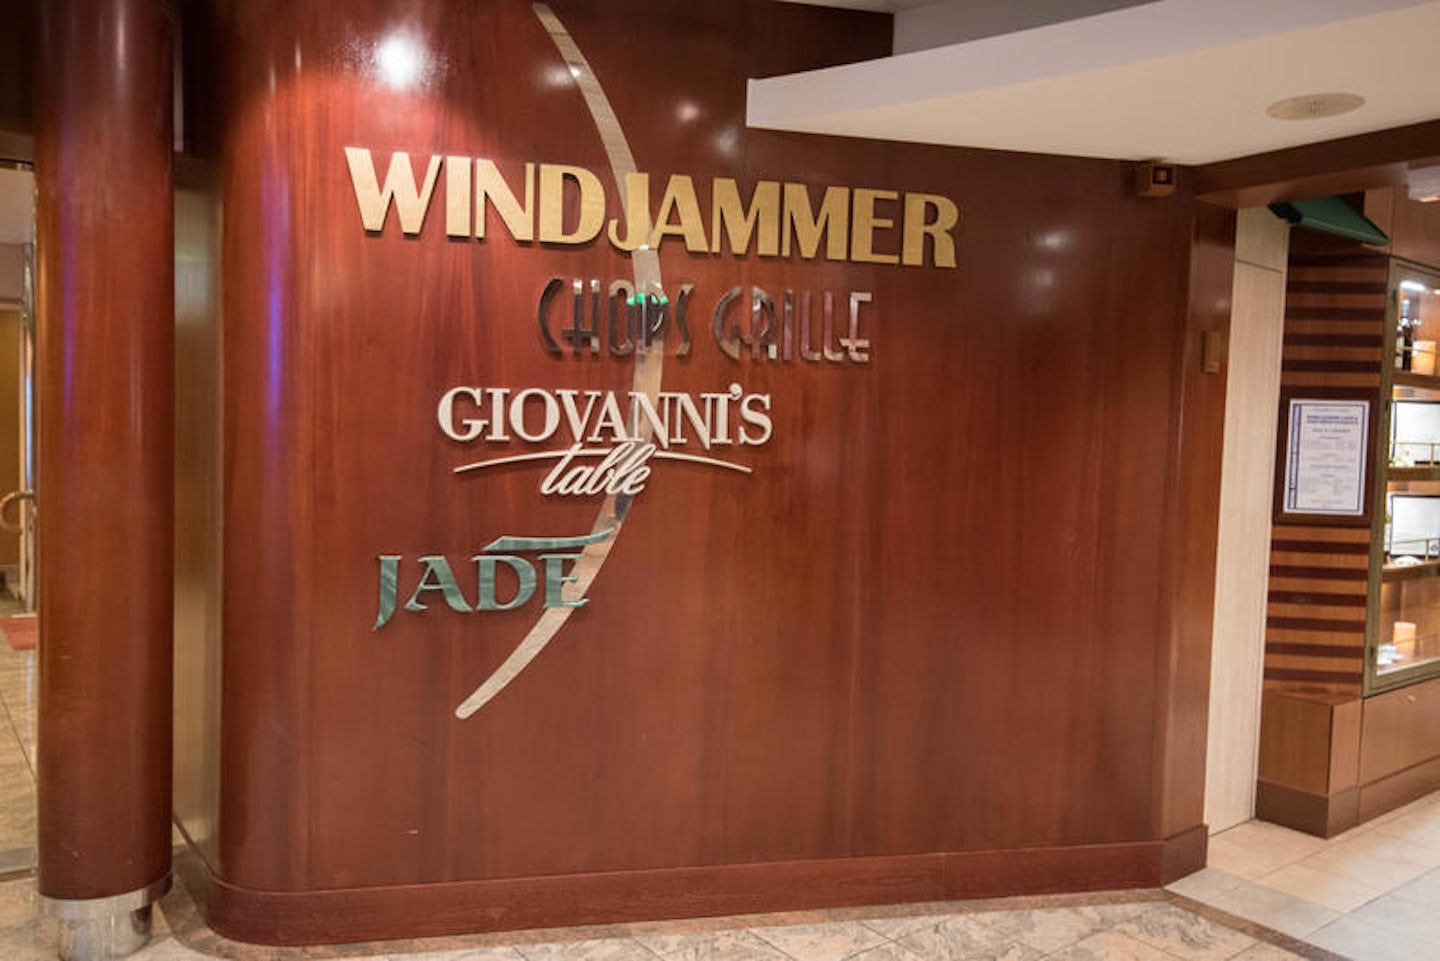 Windjammer Cafe on Freedom of the Seas